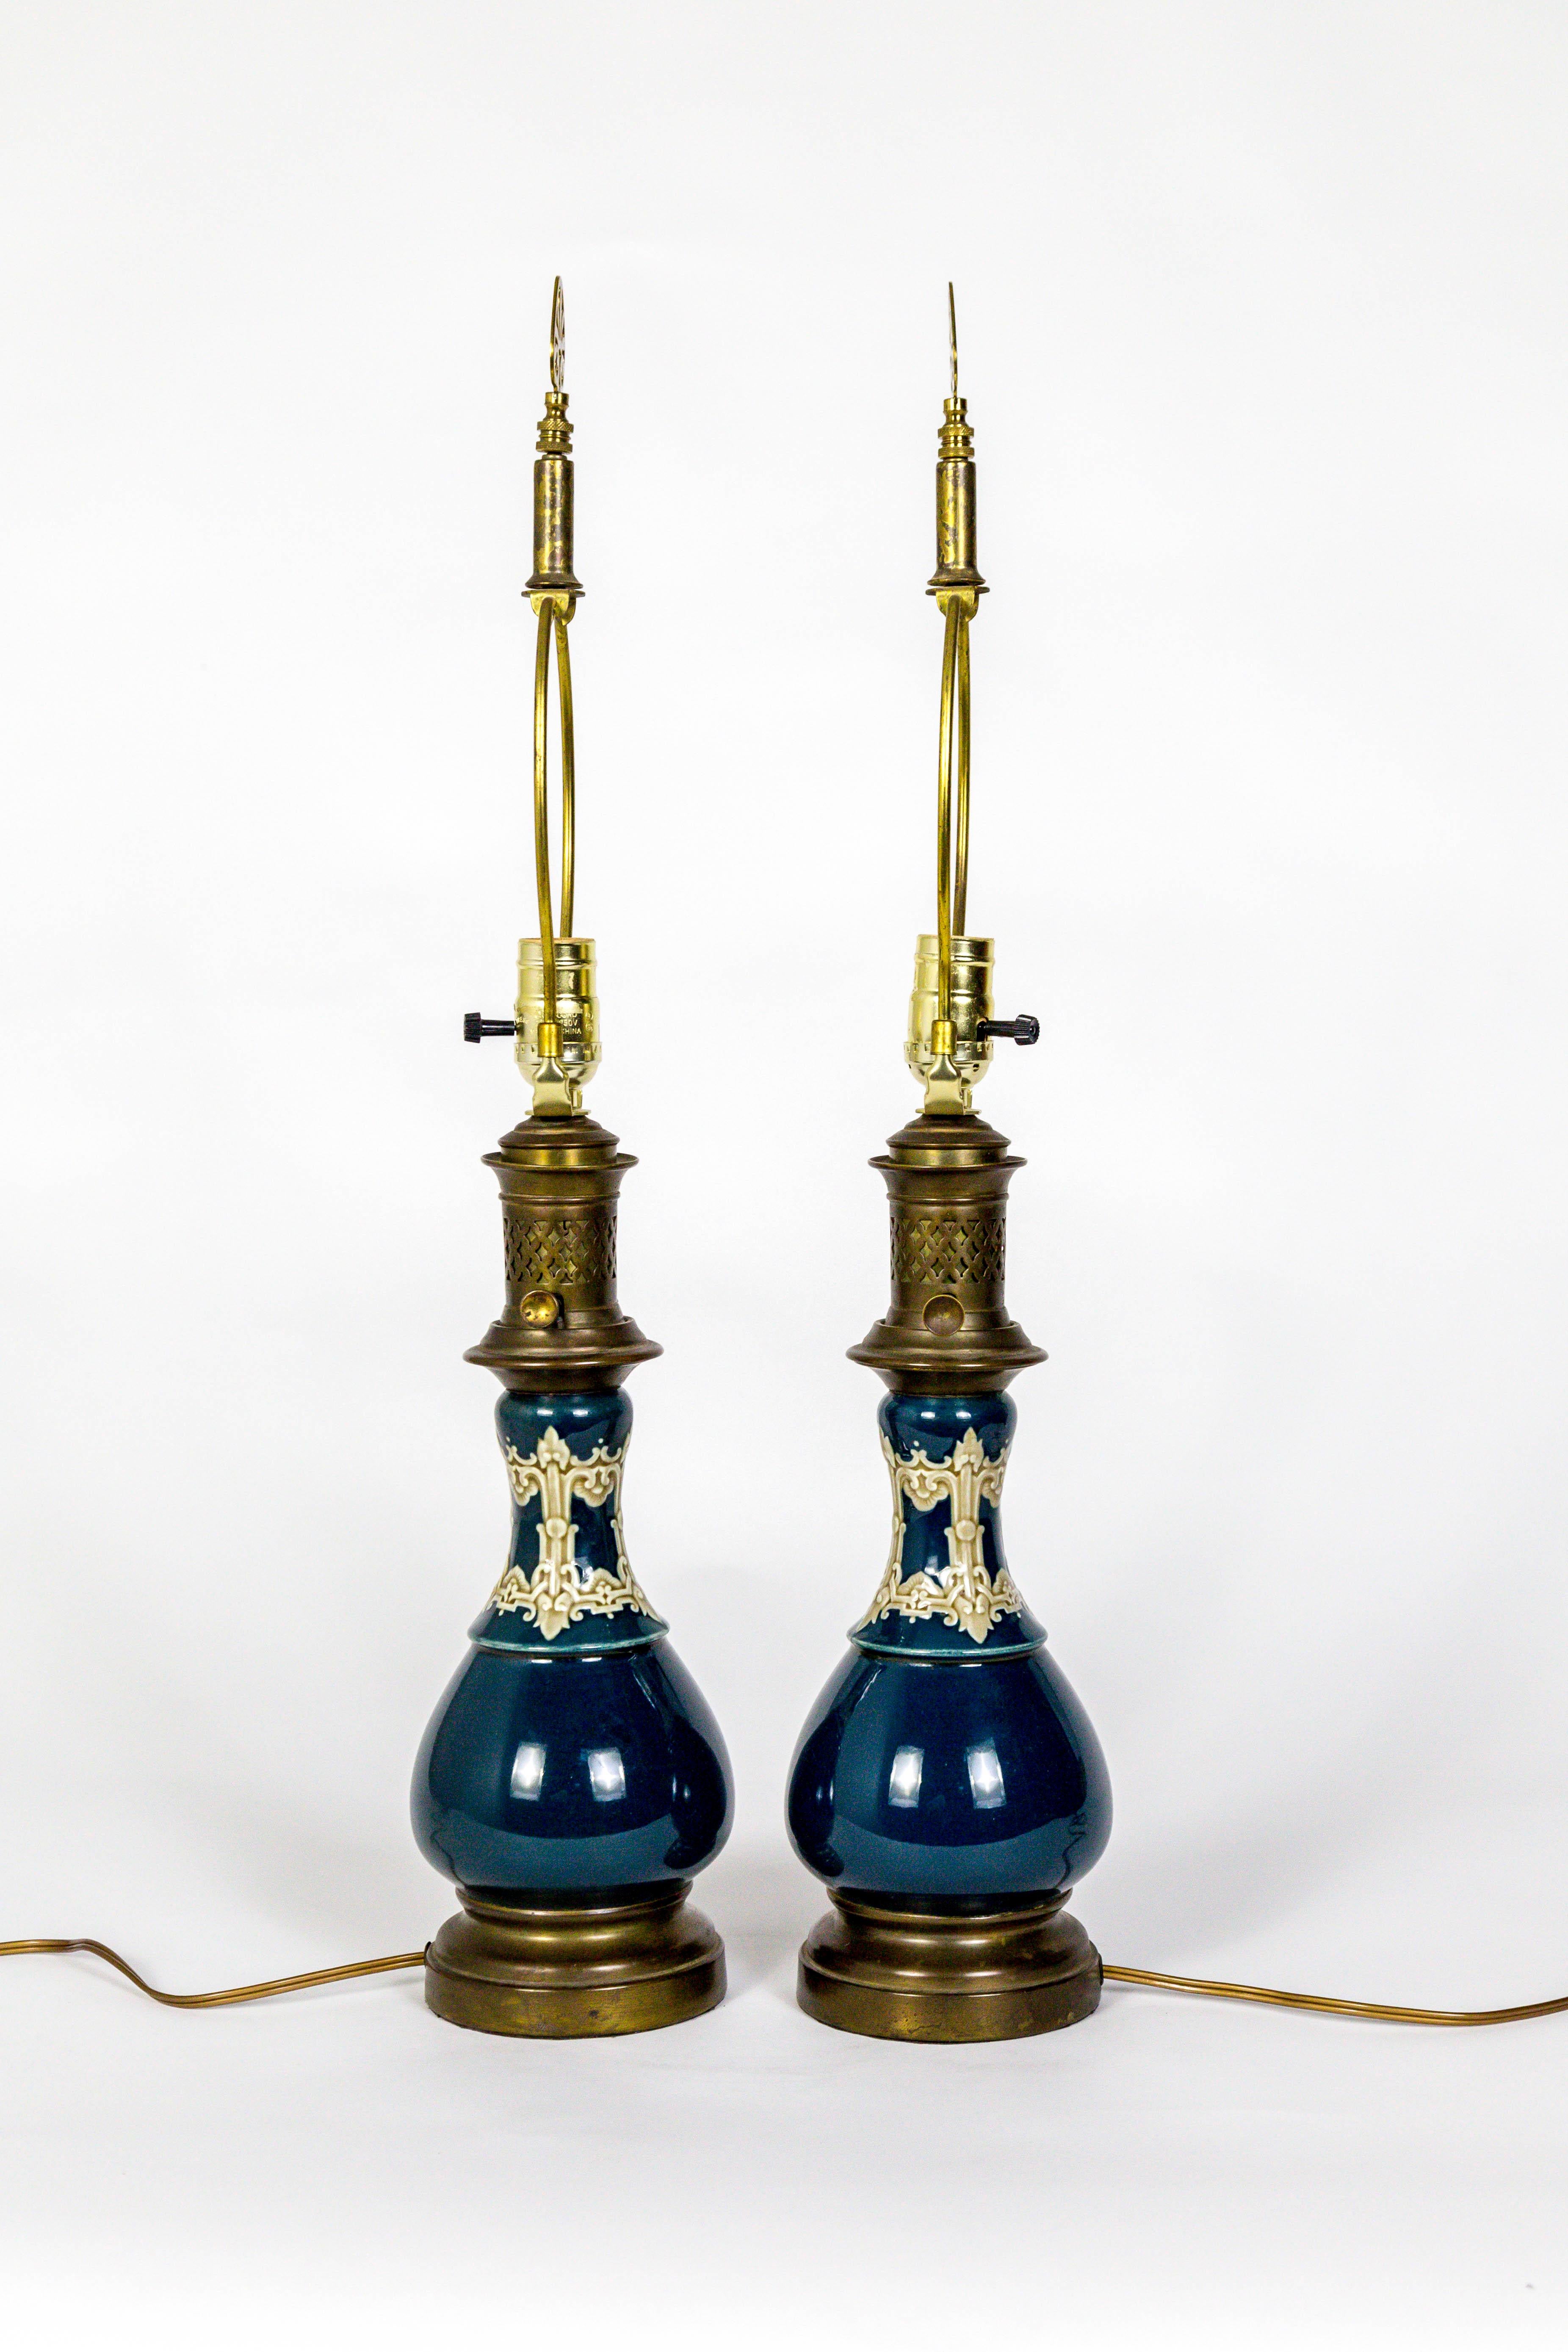 A lovely pair of ceramic, late 19th century, converted kerosene lamps in dark turquoise with modeled details in muddy green and cream. Wonderful brass piecework chimneys and keys, with complimenting brass finials. Dutch, 1880s. Measures: 27